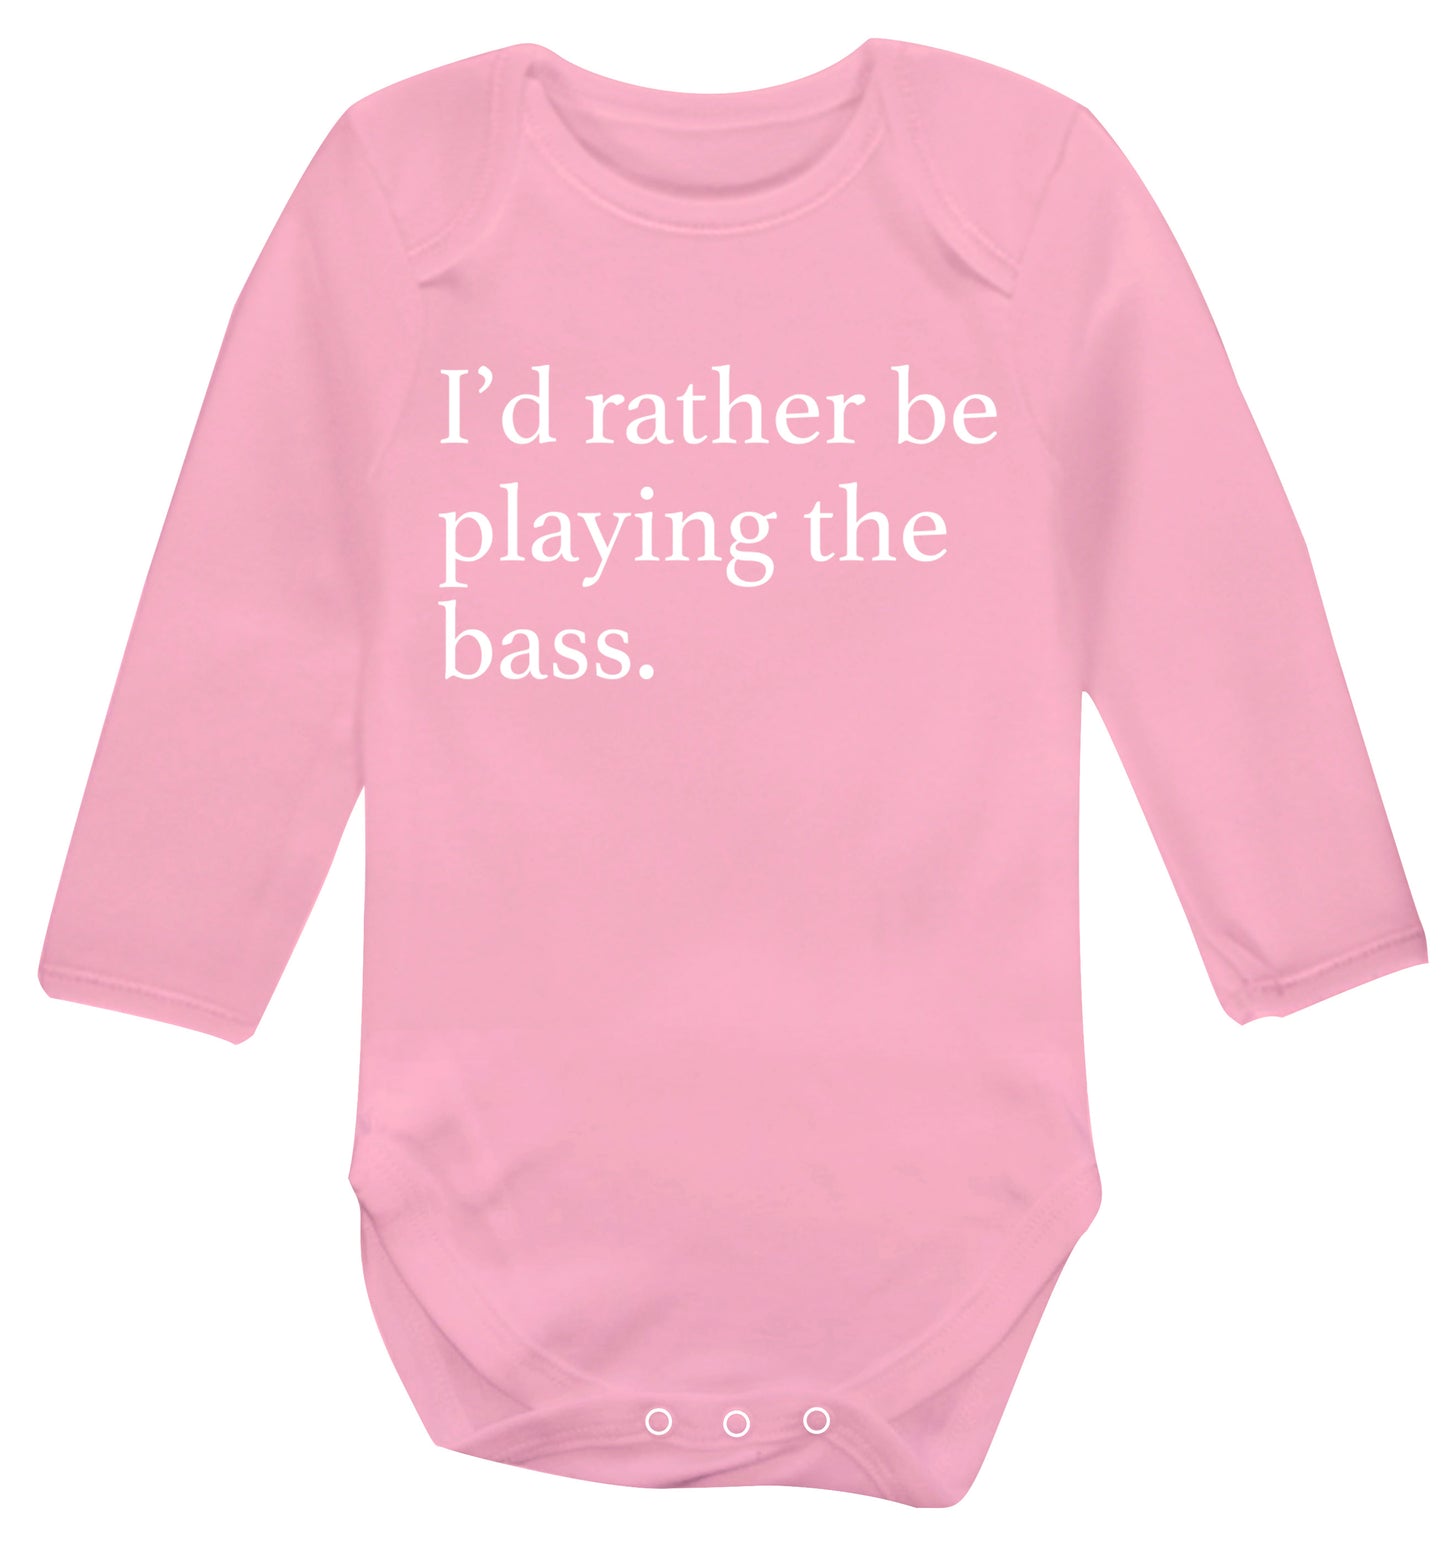 I'd rather by playing the bass Baby Vest long sleeved pale pink 6-12 months